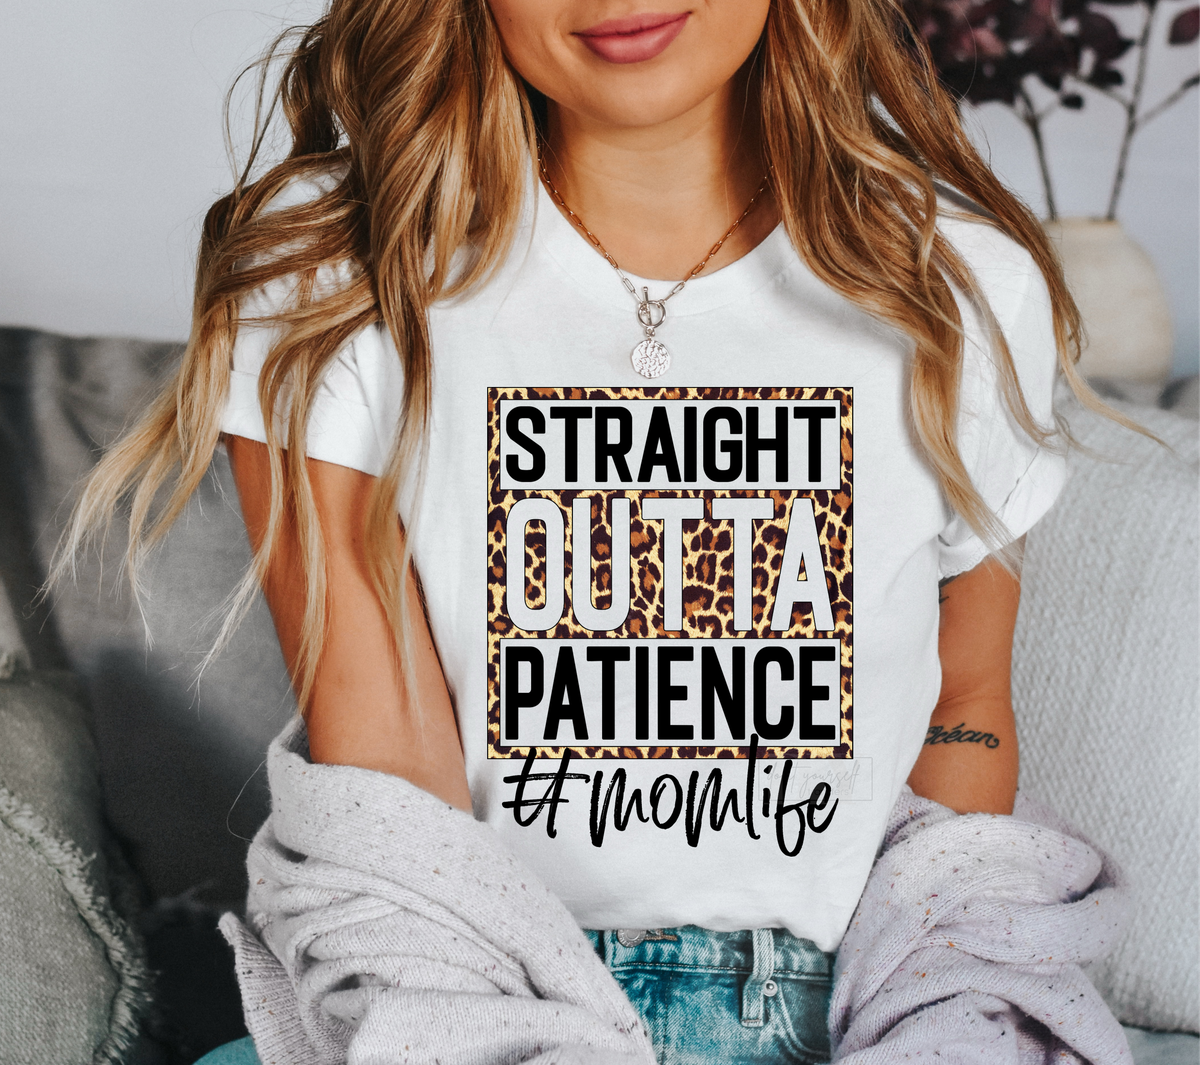 Straight outta patience #momlife leopard   size ADULT 12x10 DTF TRANSFERPRINT TO ORDER